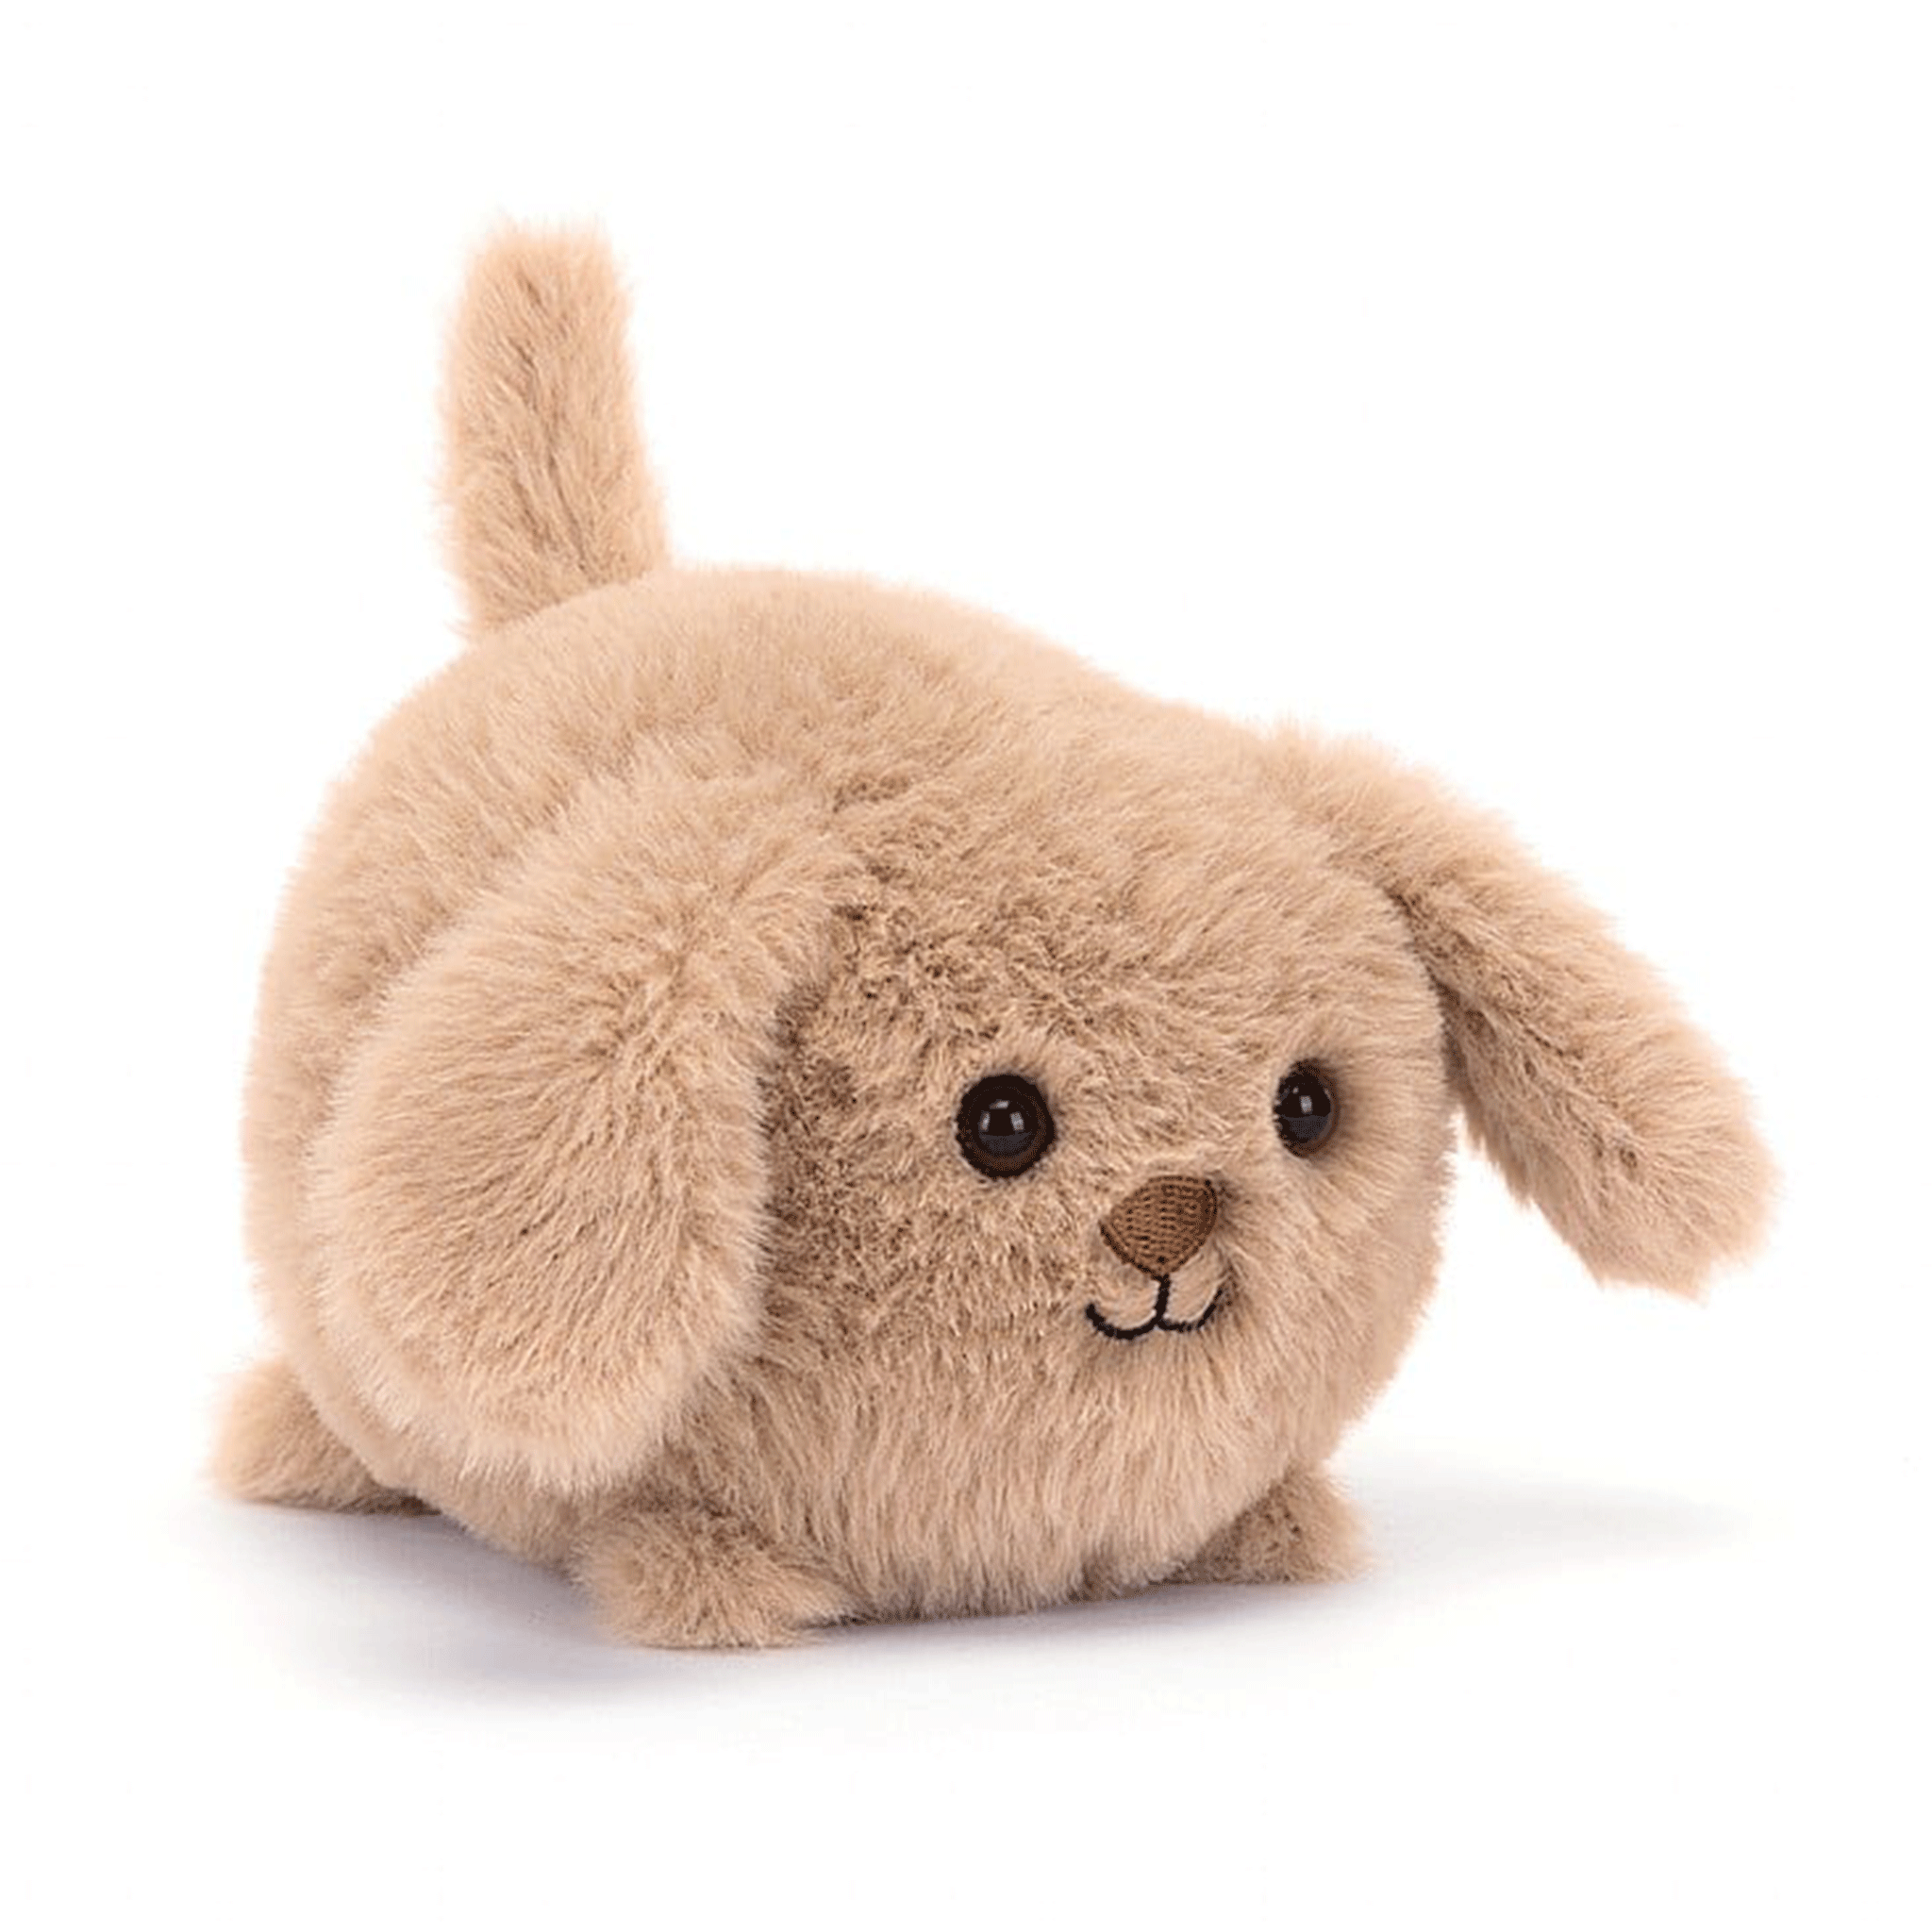 On a white background is a tan puppy stuffed toy puppy with a round body and floppy ears. 